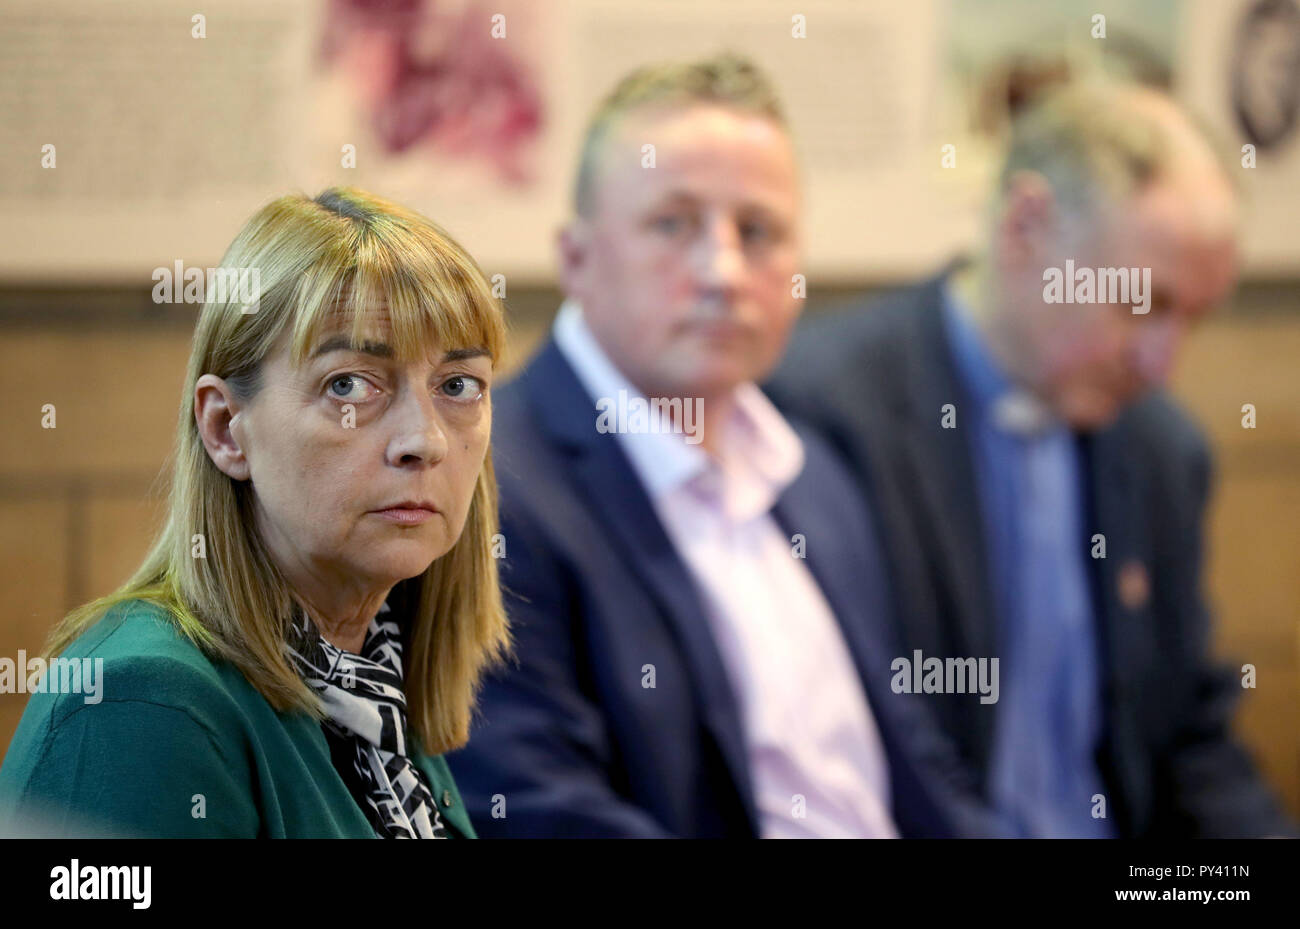 Stuart and Linda Allan, parents of Katie Allan, with University chaplin Reverend Stuart McQuarrie (right) during a press conference at Glasgow University to launch a campaign to reform the way the justice system deals with mental health. Stock Photo